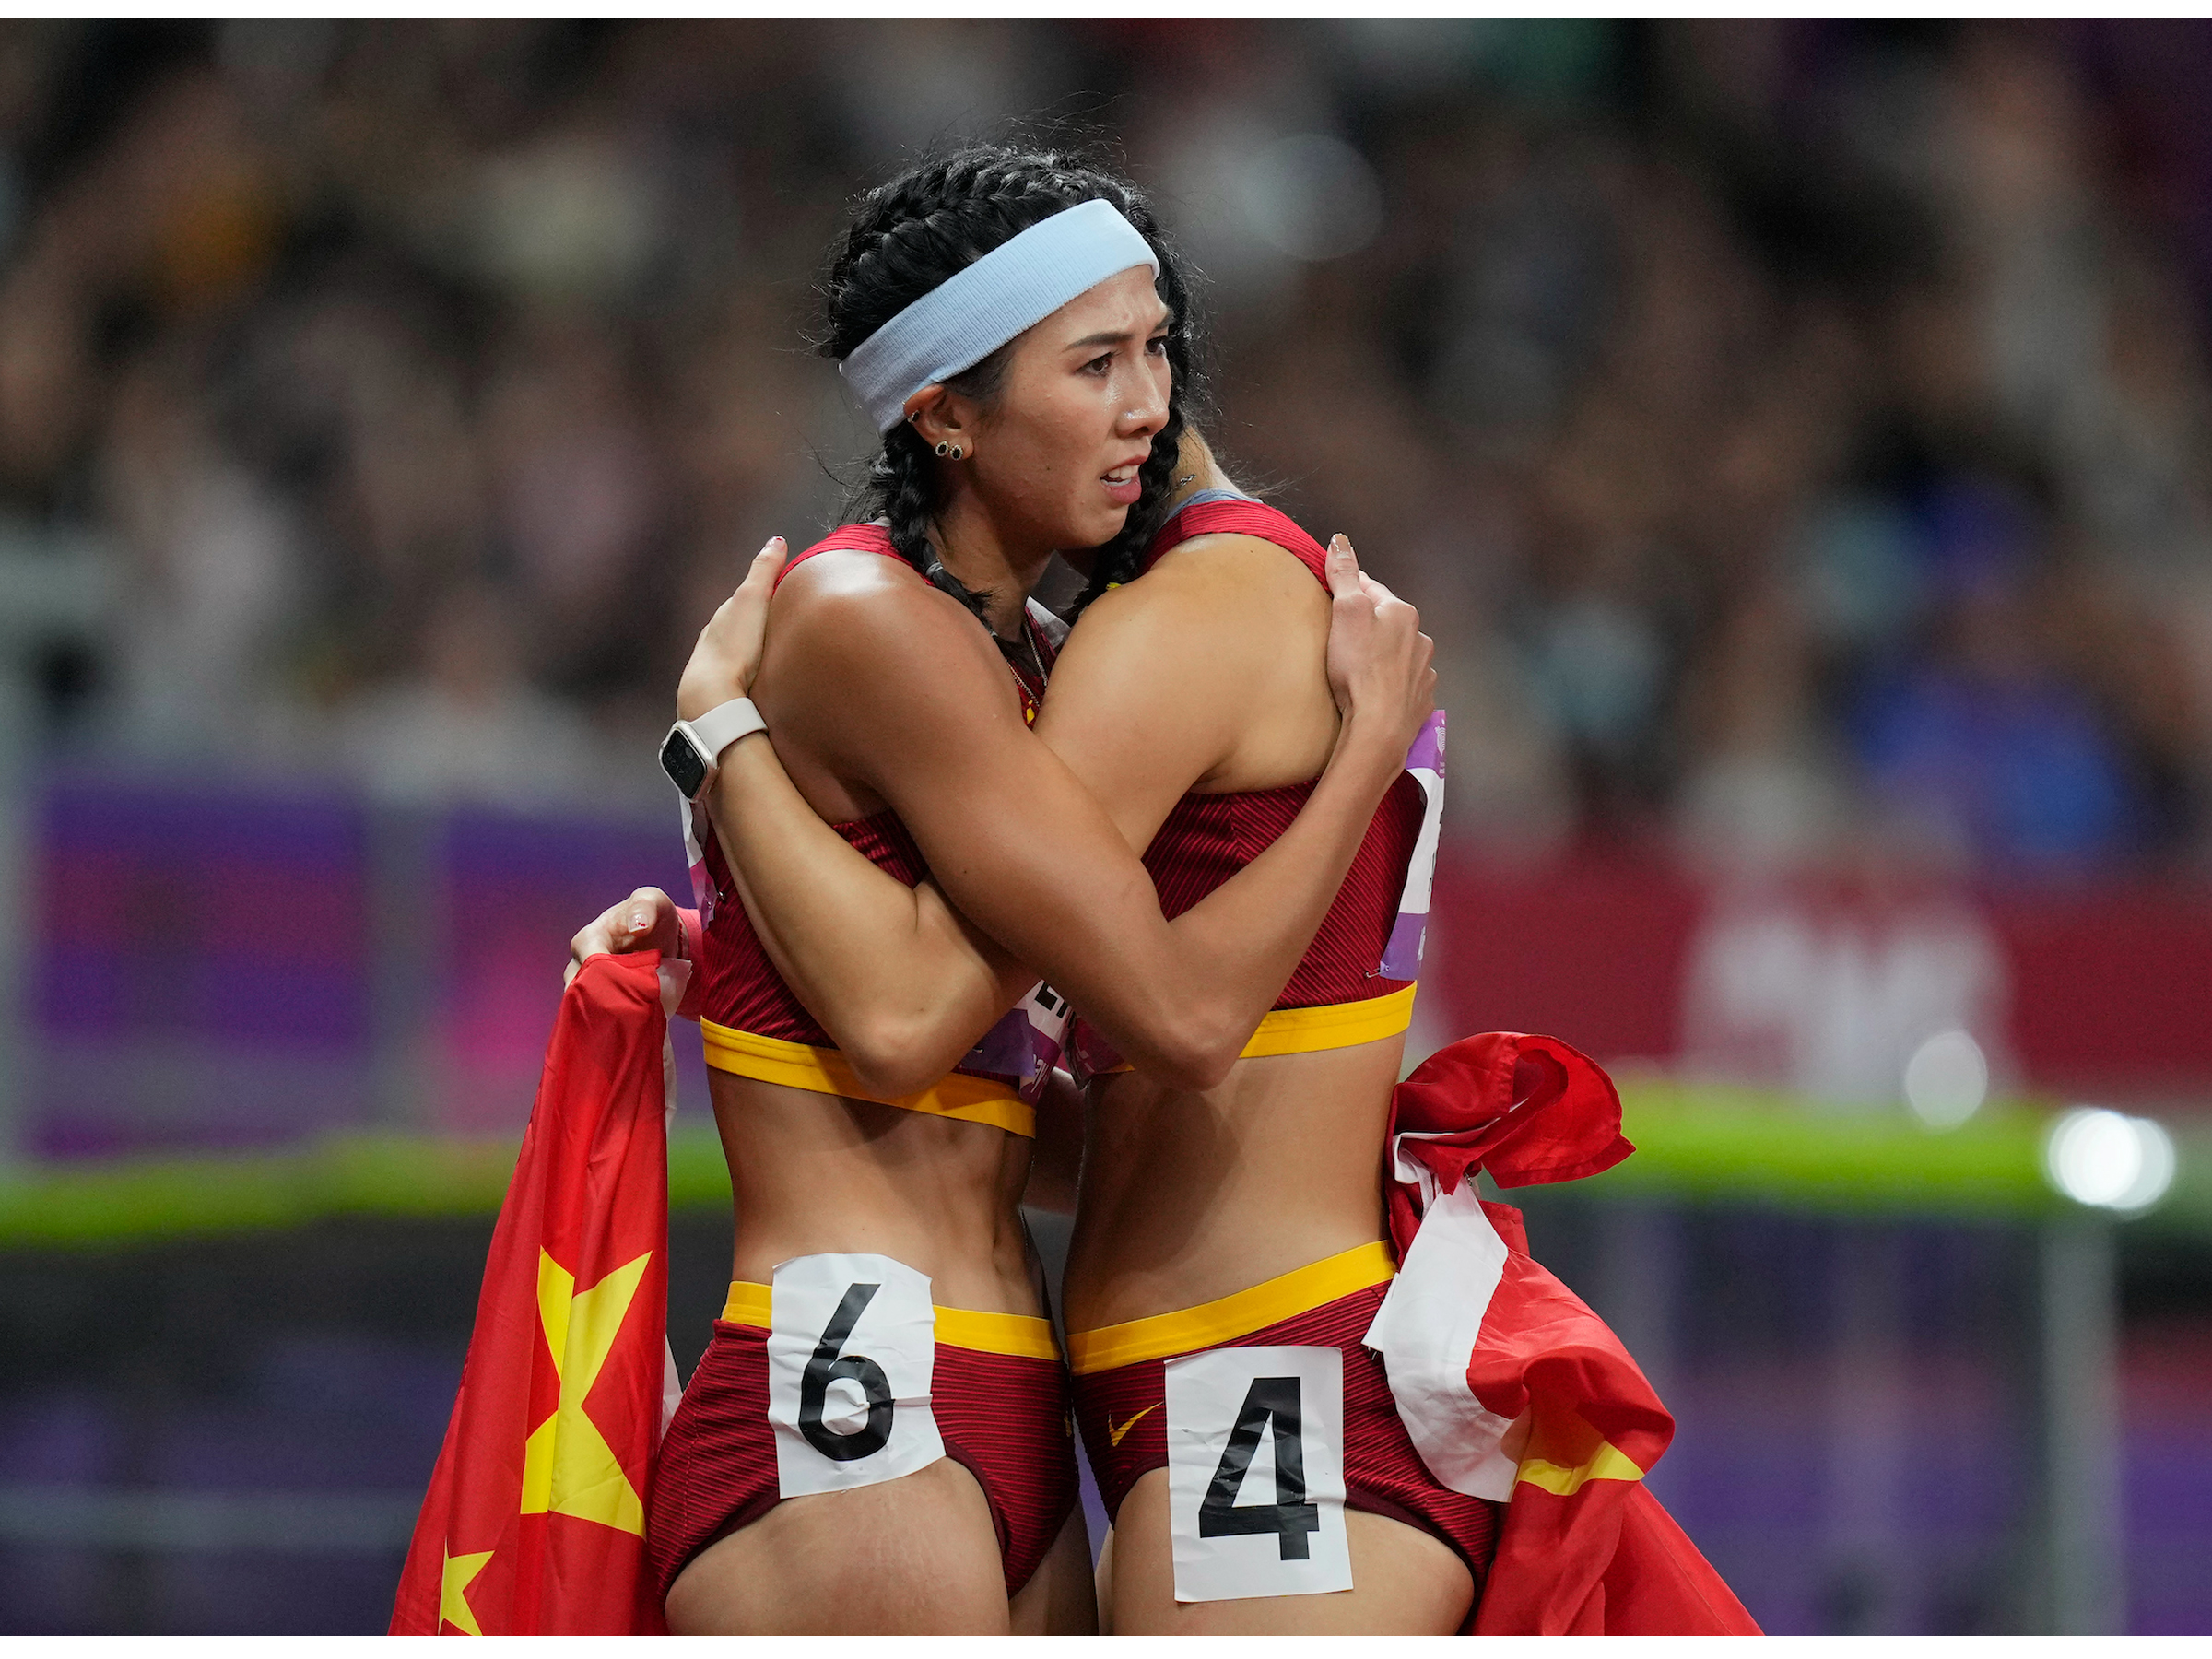 Did China Censor a Photo of Two Women Athletes Embracing?